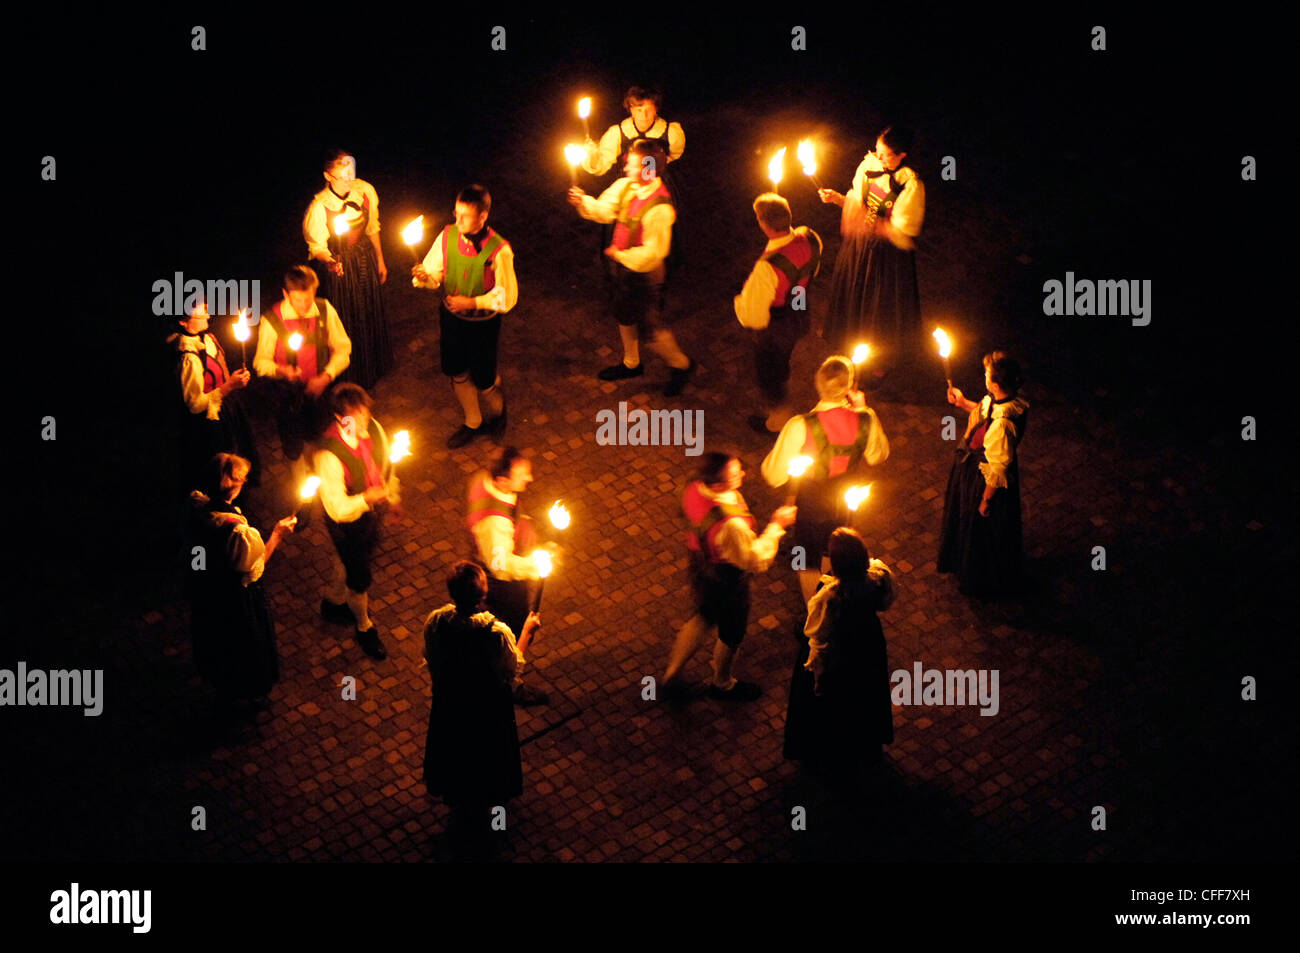 South Tyrol traditional dancing with torches, Alto Adige, South Tyrol, Italy Stock Photo